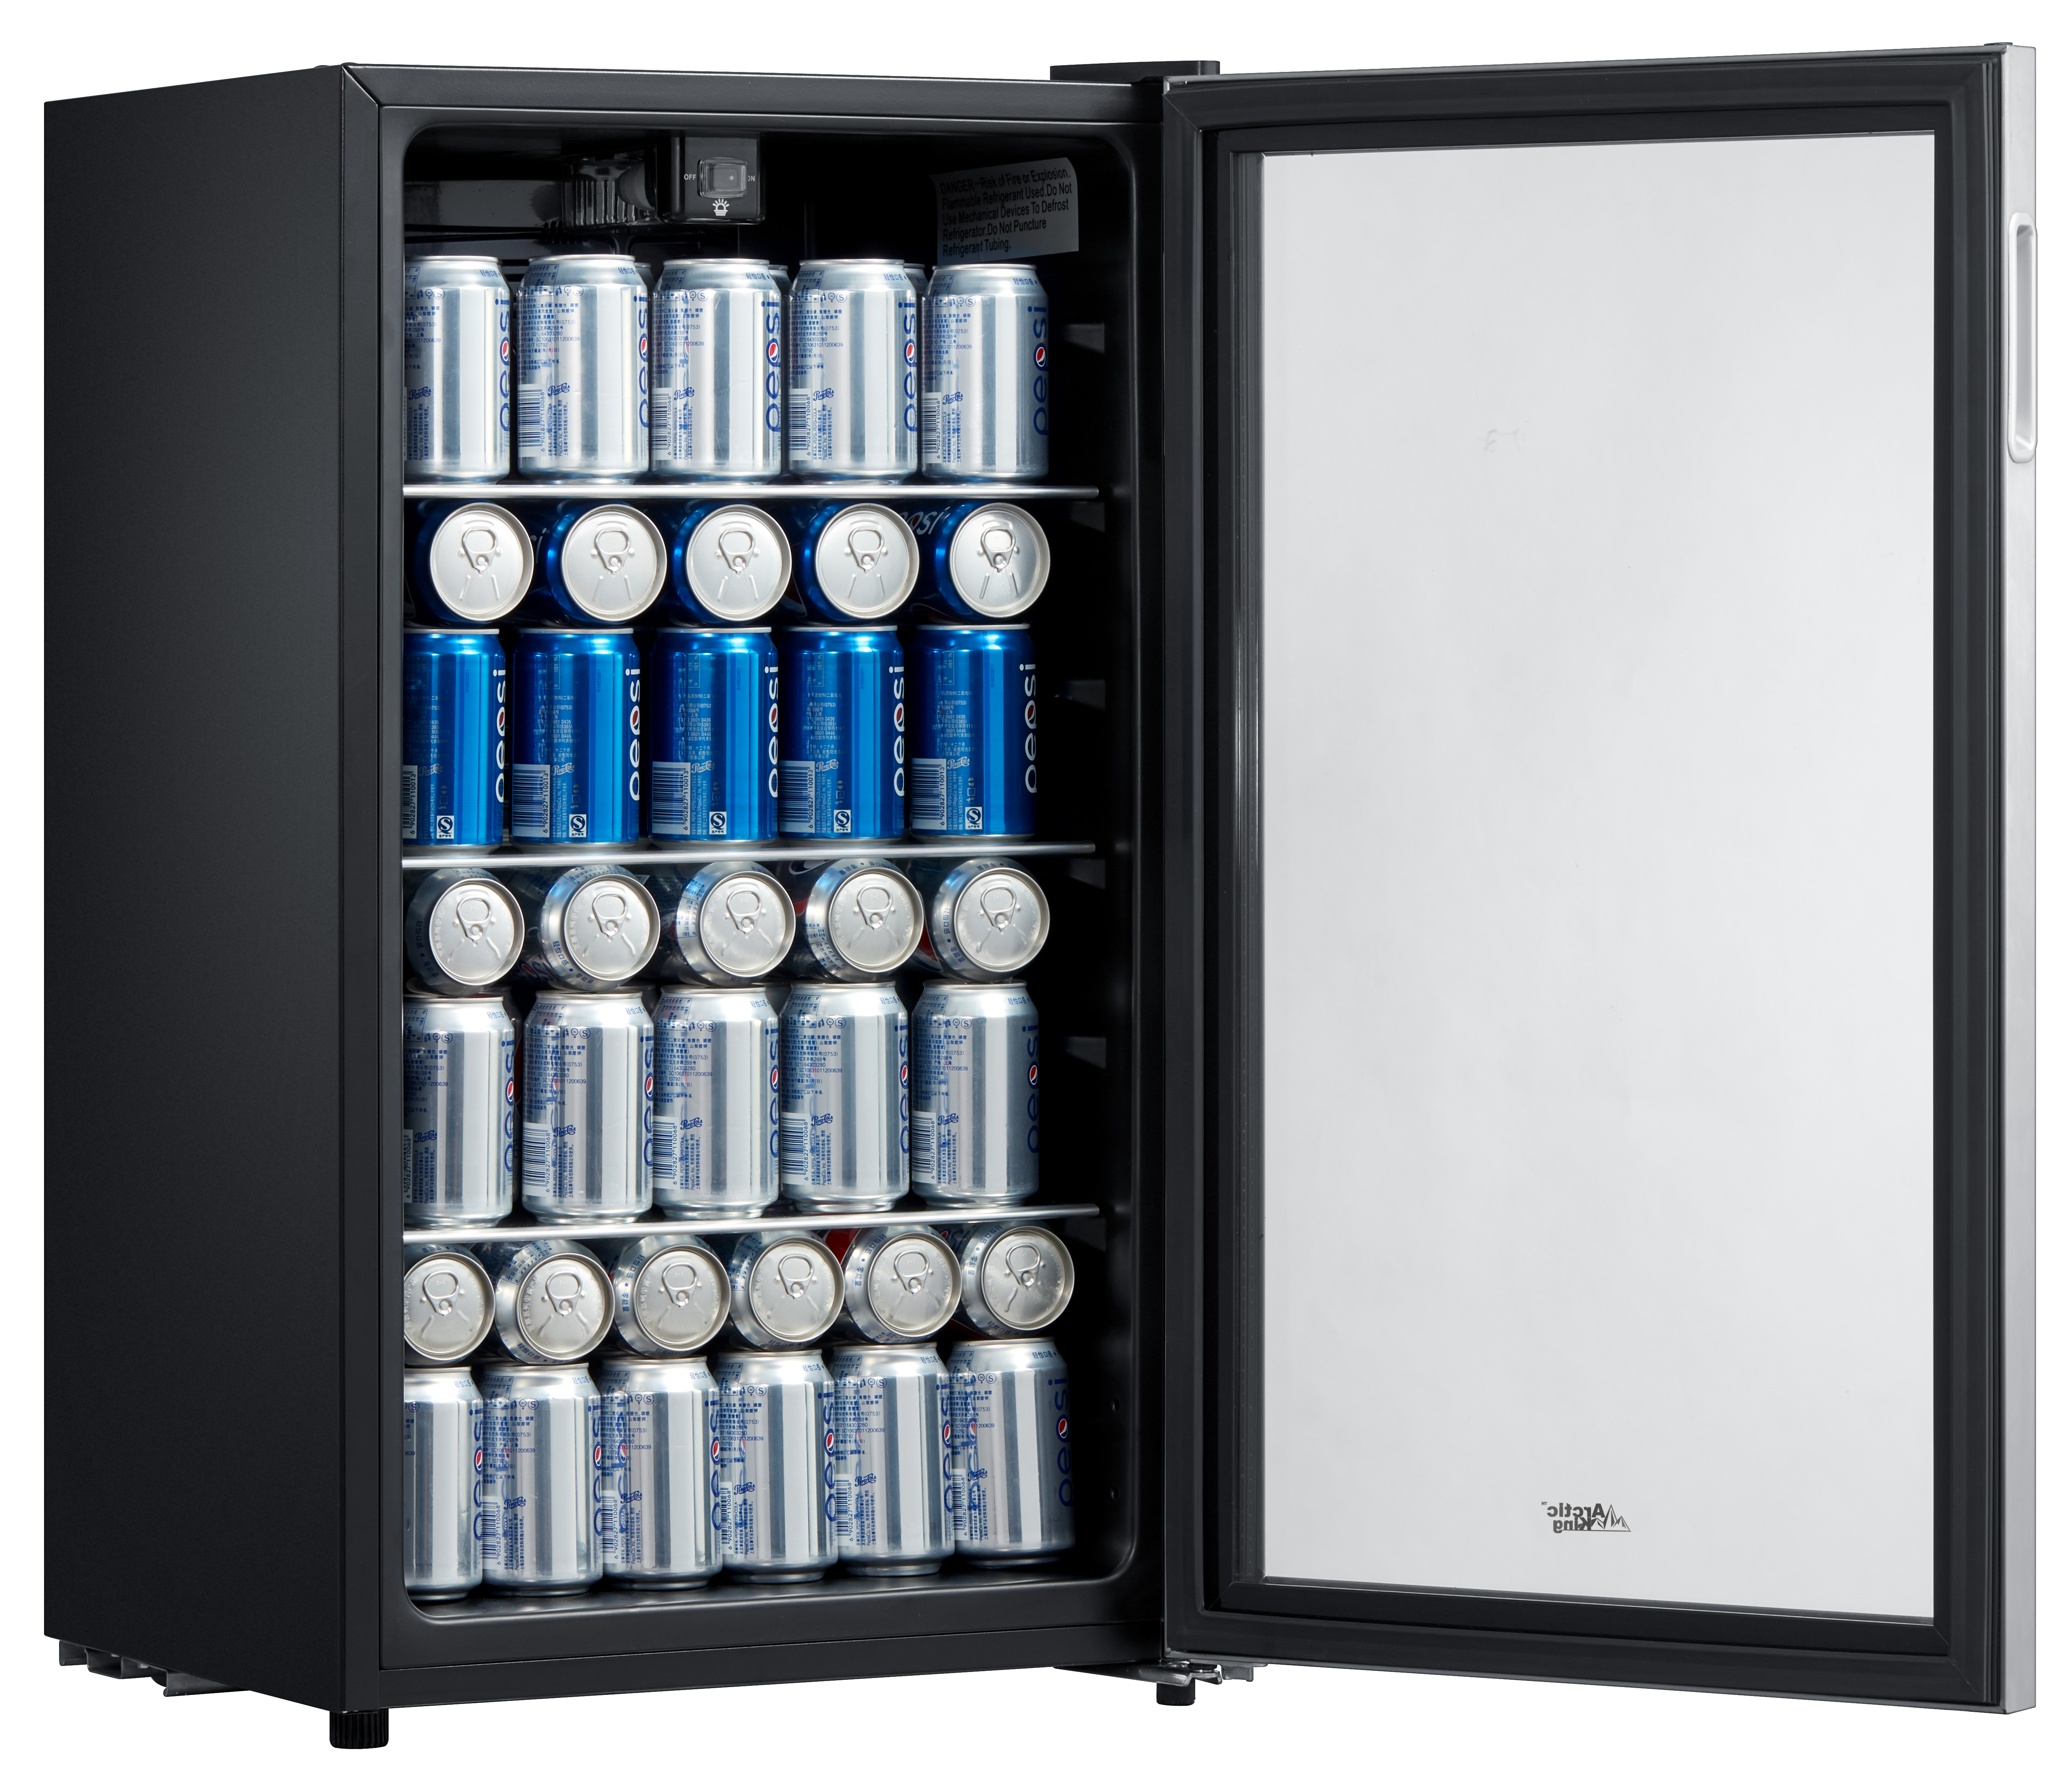 Arctic King 115 Can Beverage Fridge, Stainless Steel look Frame - image 9 of 9